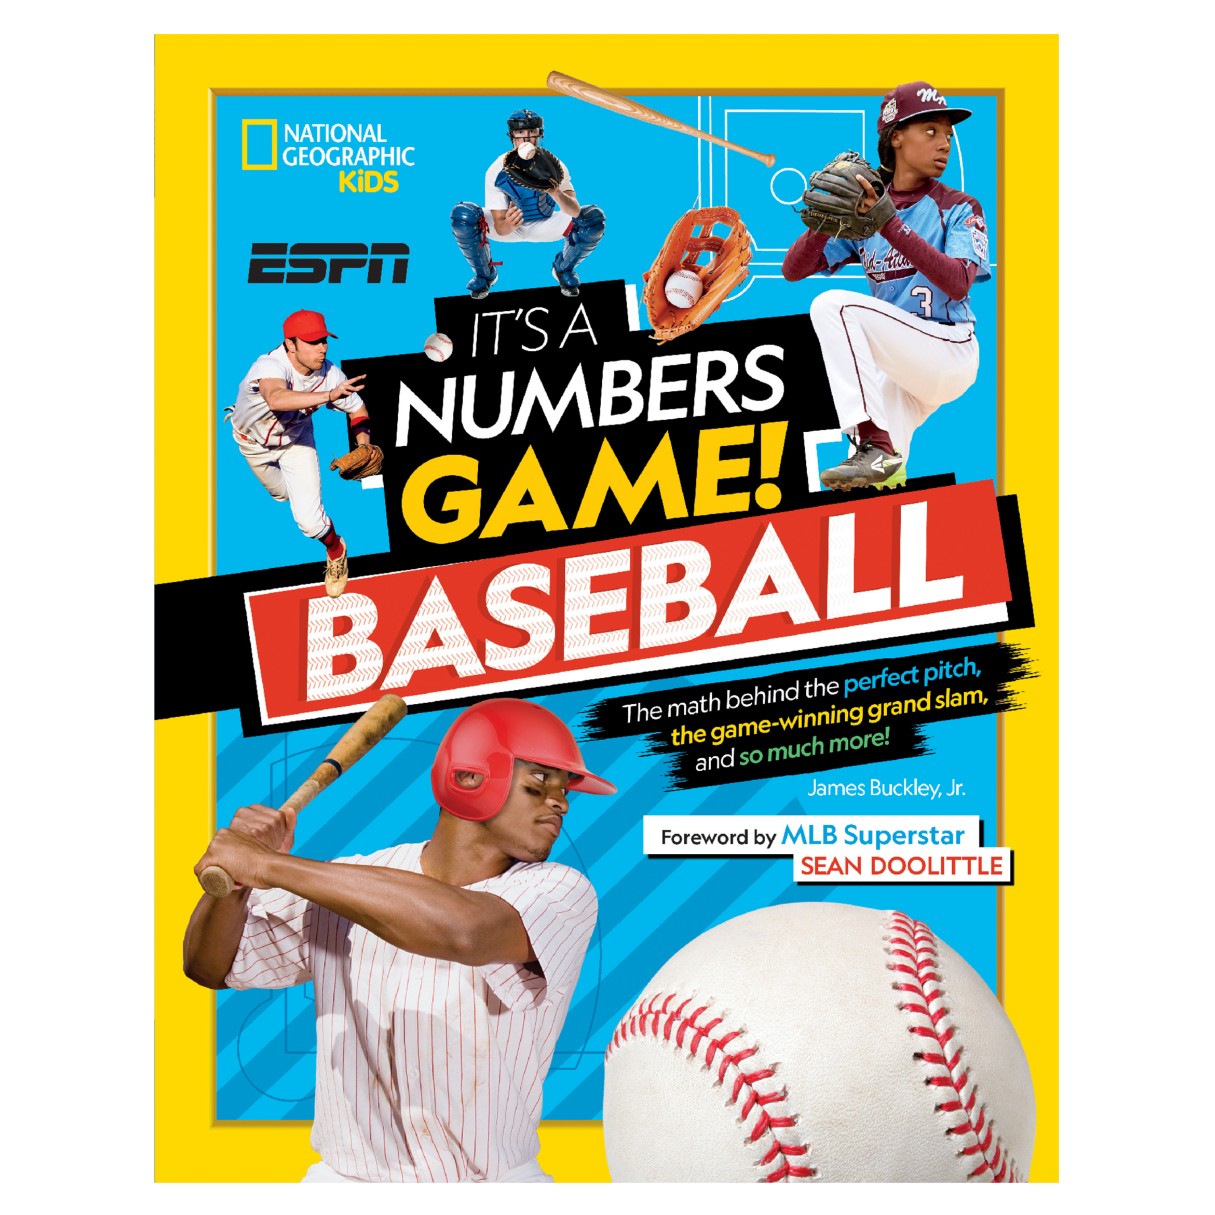 It's a Numbers Game! Baseball Book